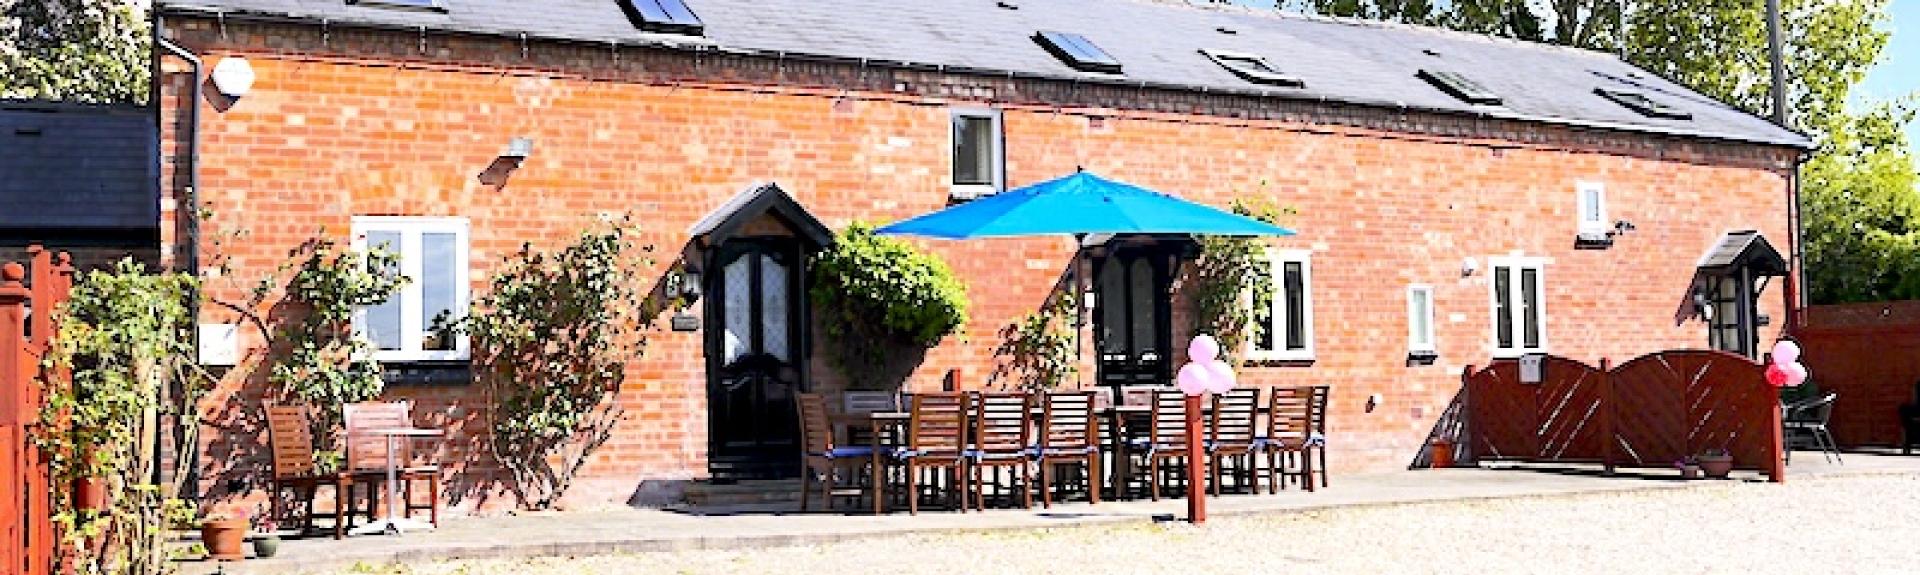 Exterior of a long brick-built barn conversion with a patio with table seating for 14.